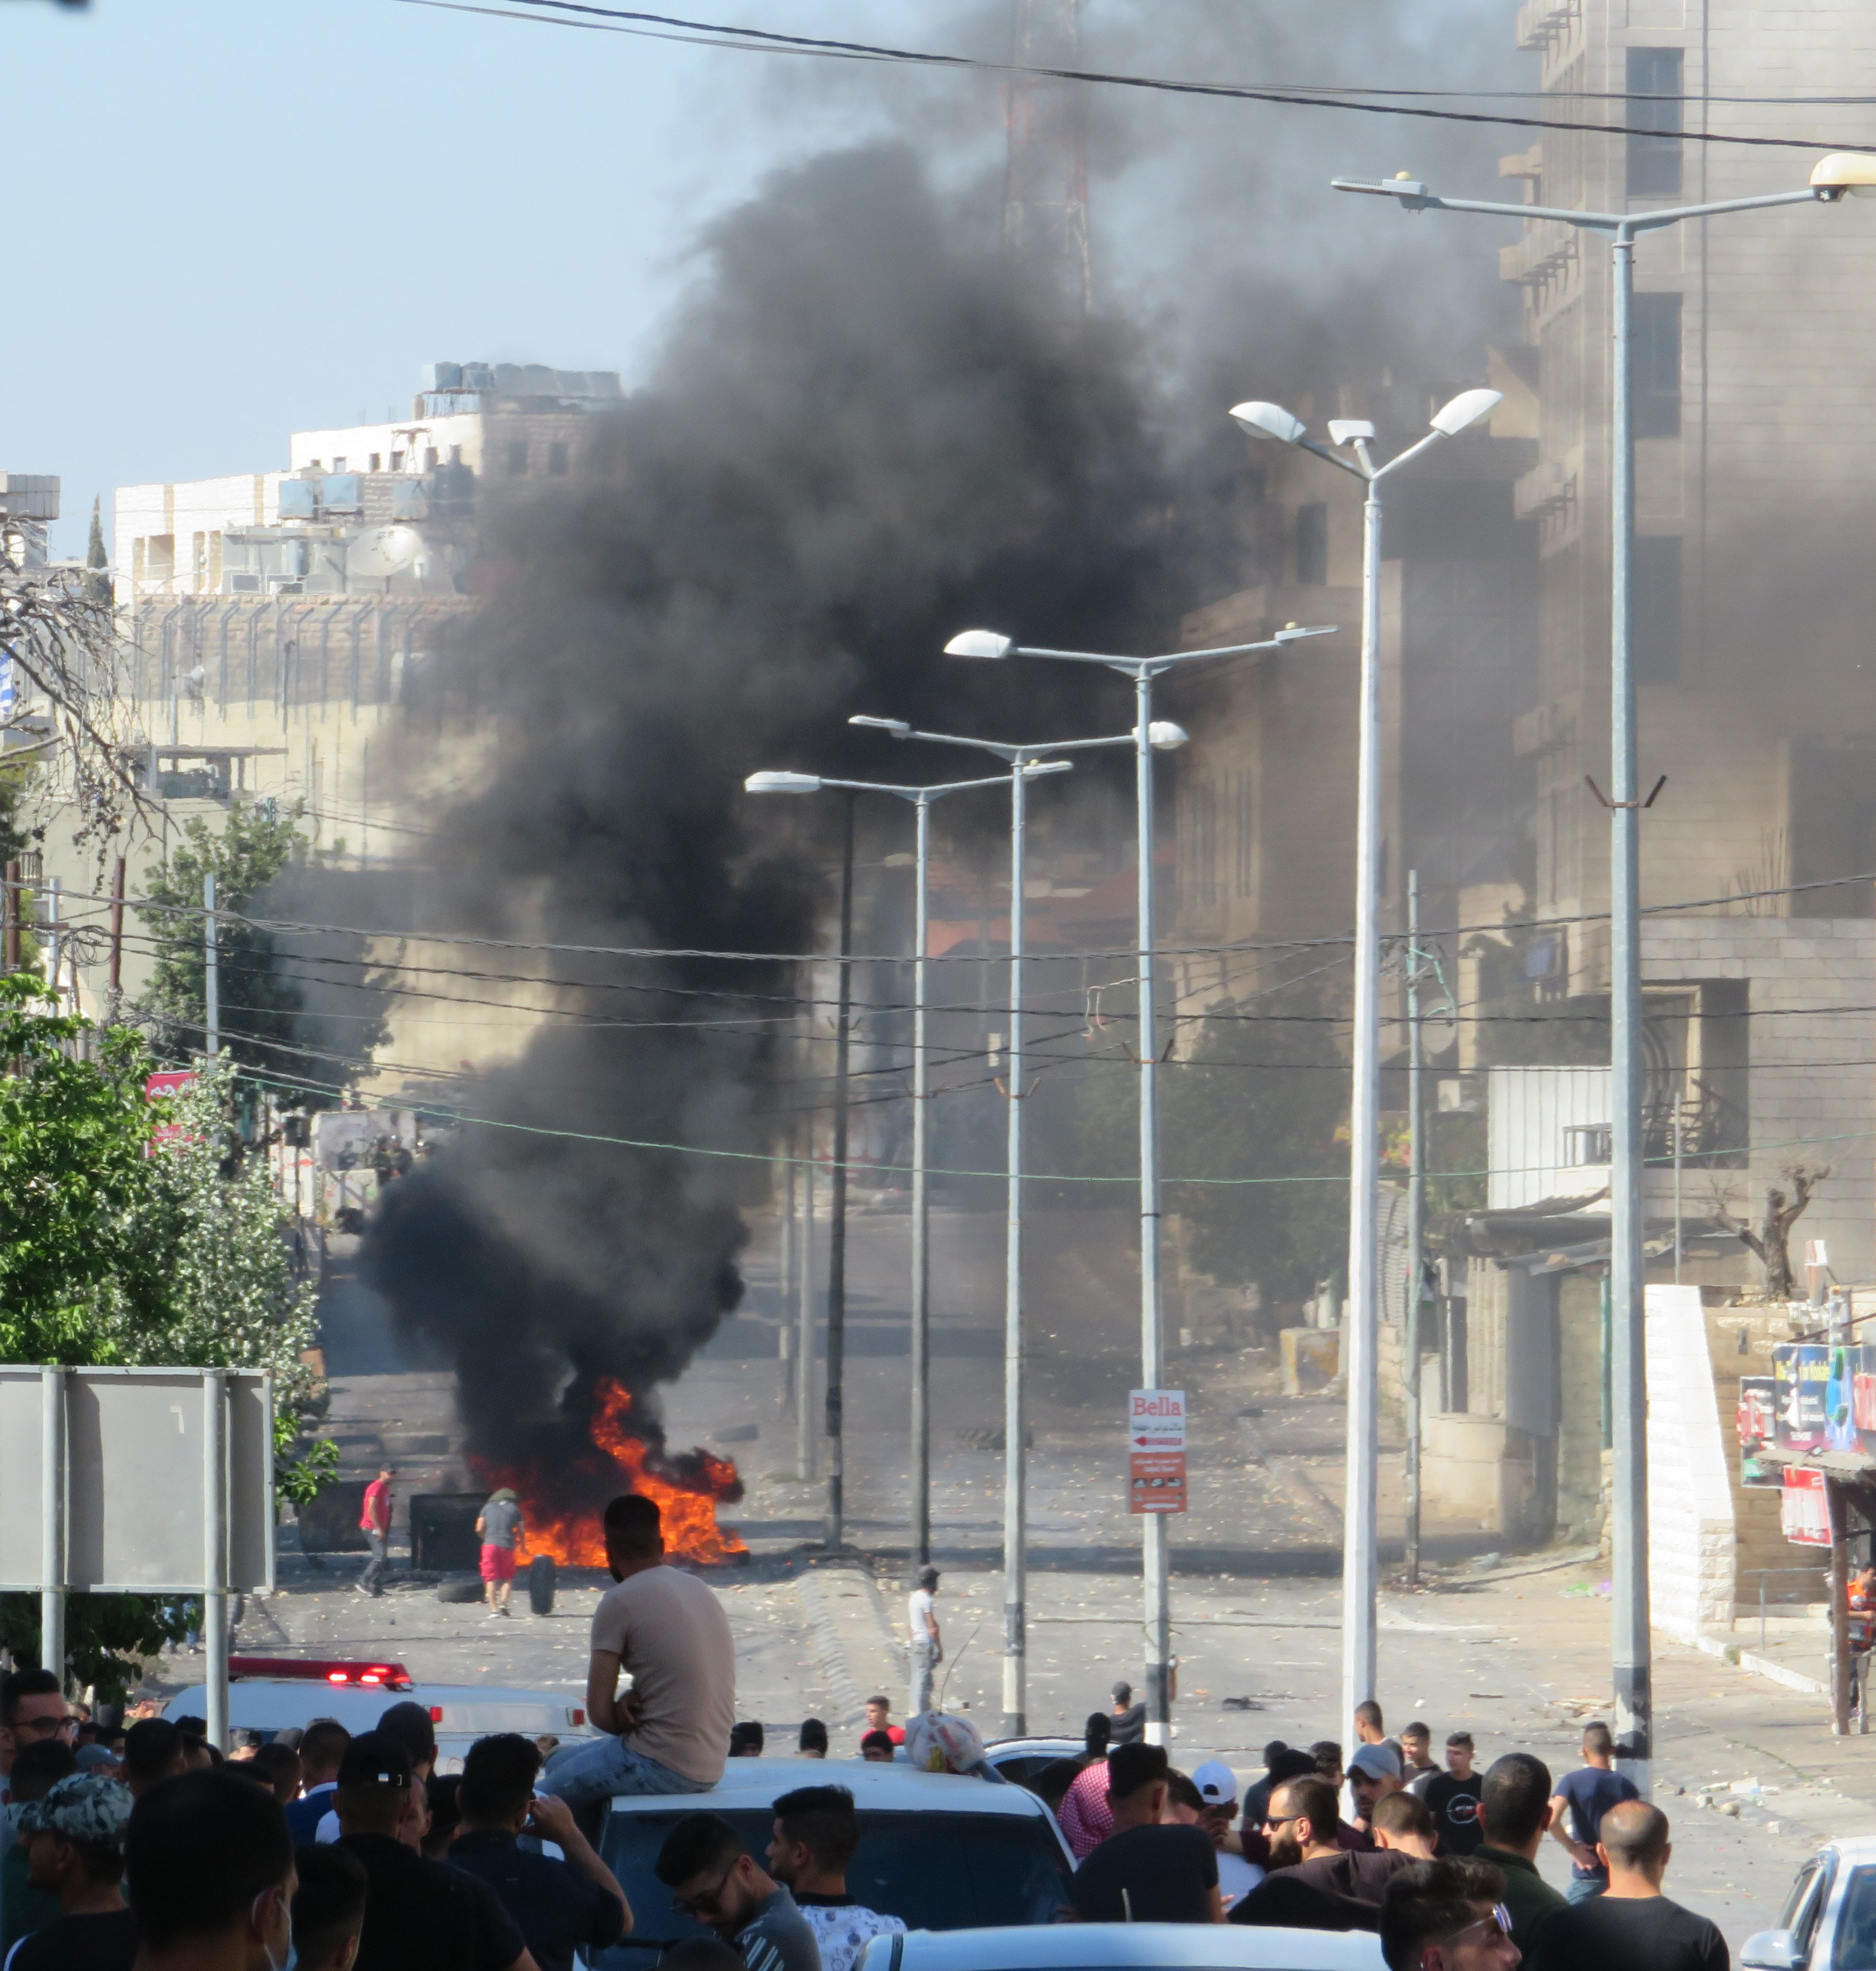 Palestinian youth burn tires in the streets of Bethlehem following an encounter with Israeli troops near Rachel’s Tomb.